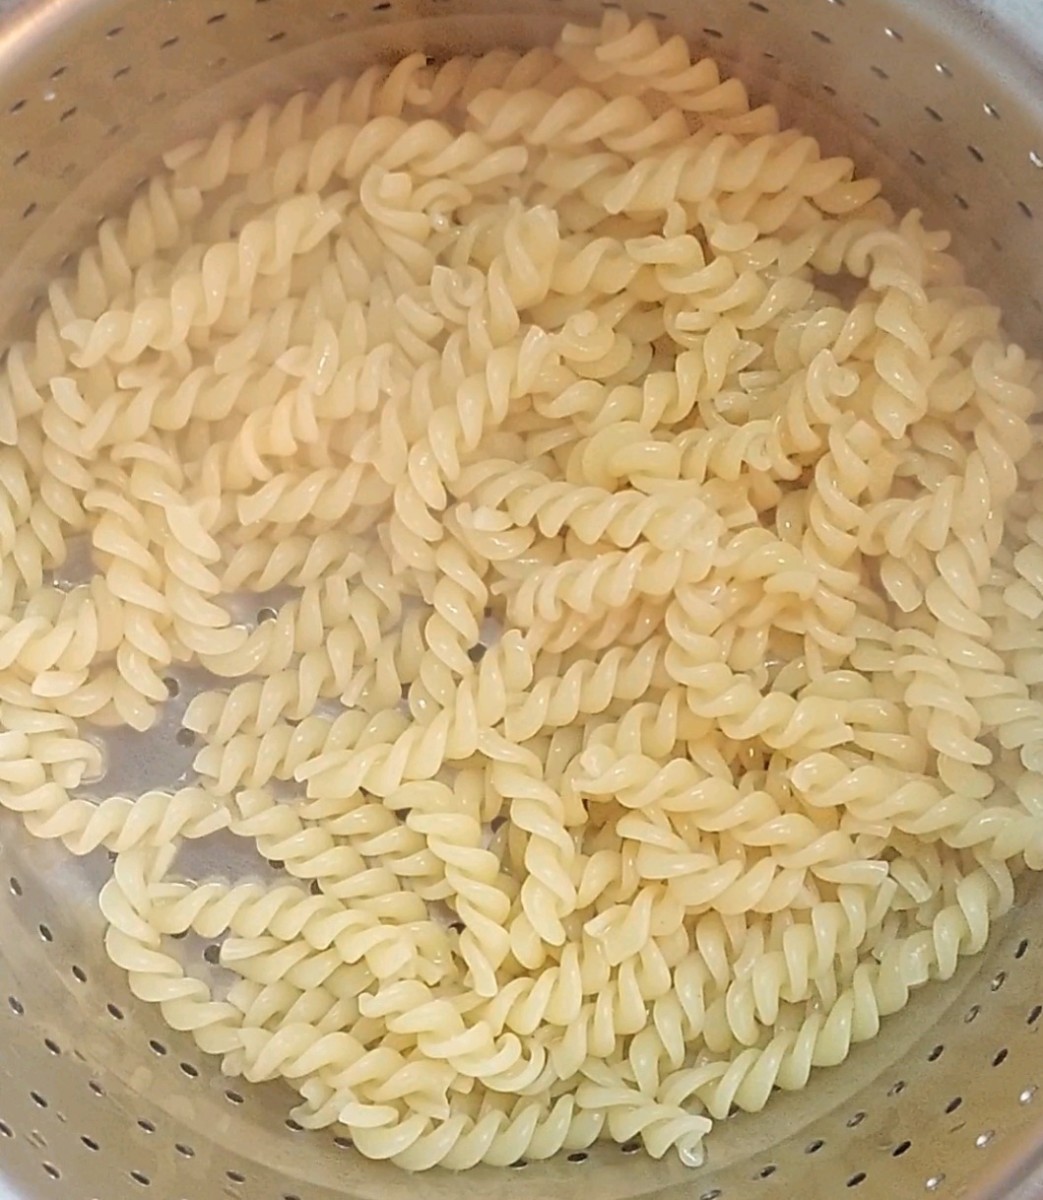 Drain the cooked pasta in a colander and set aside.